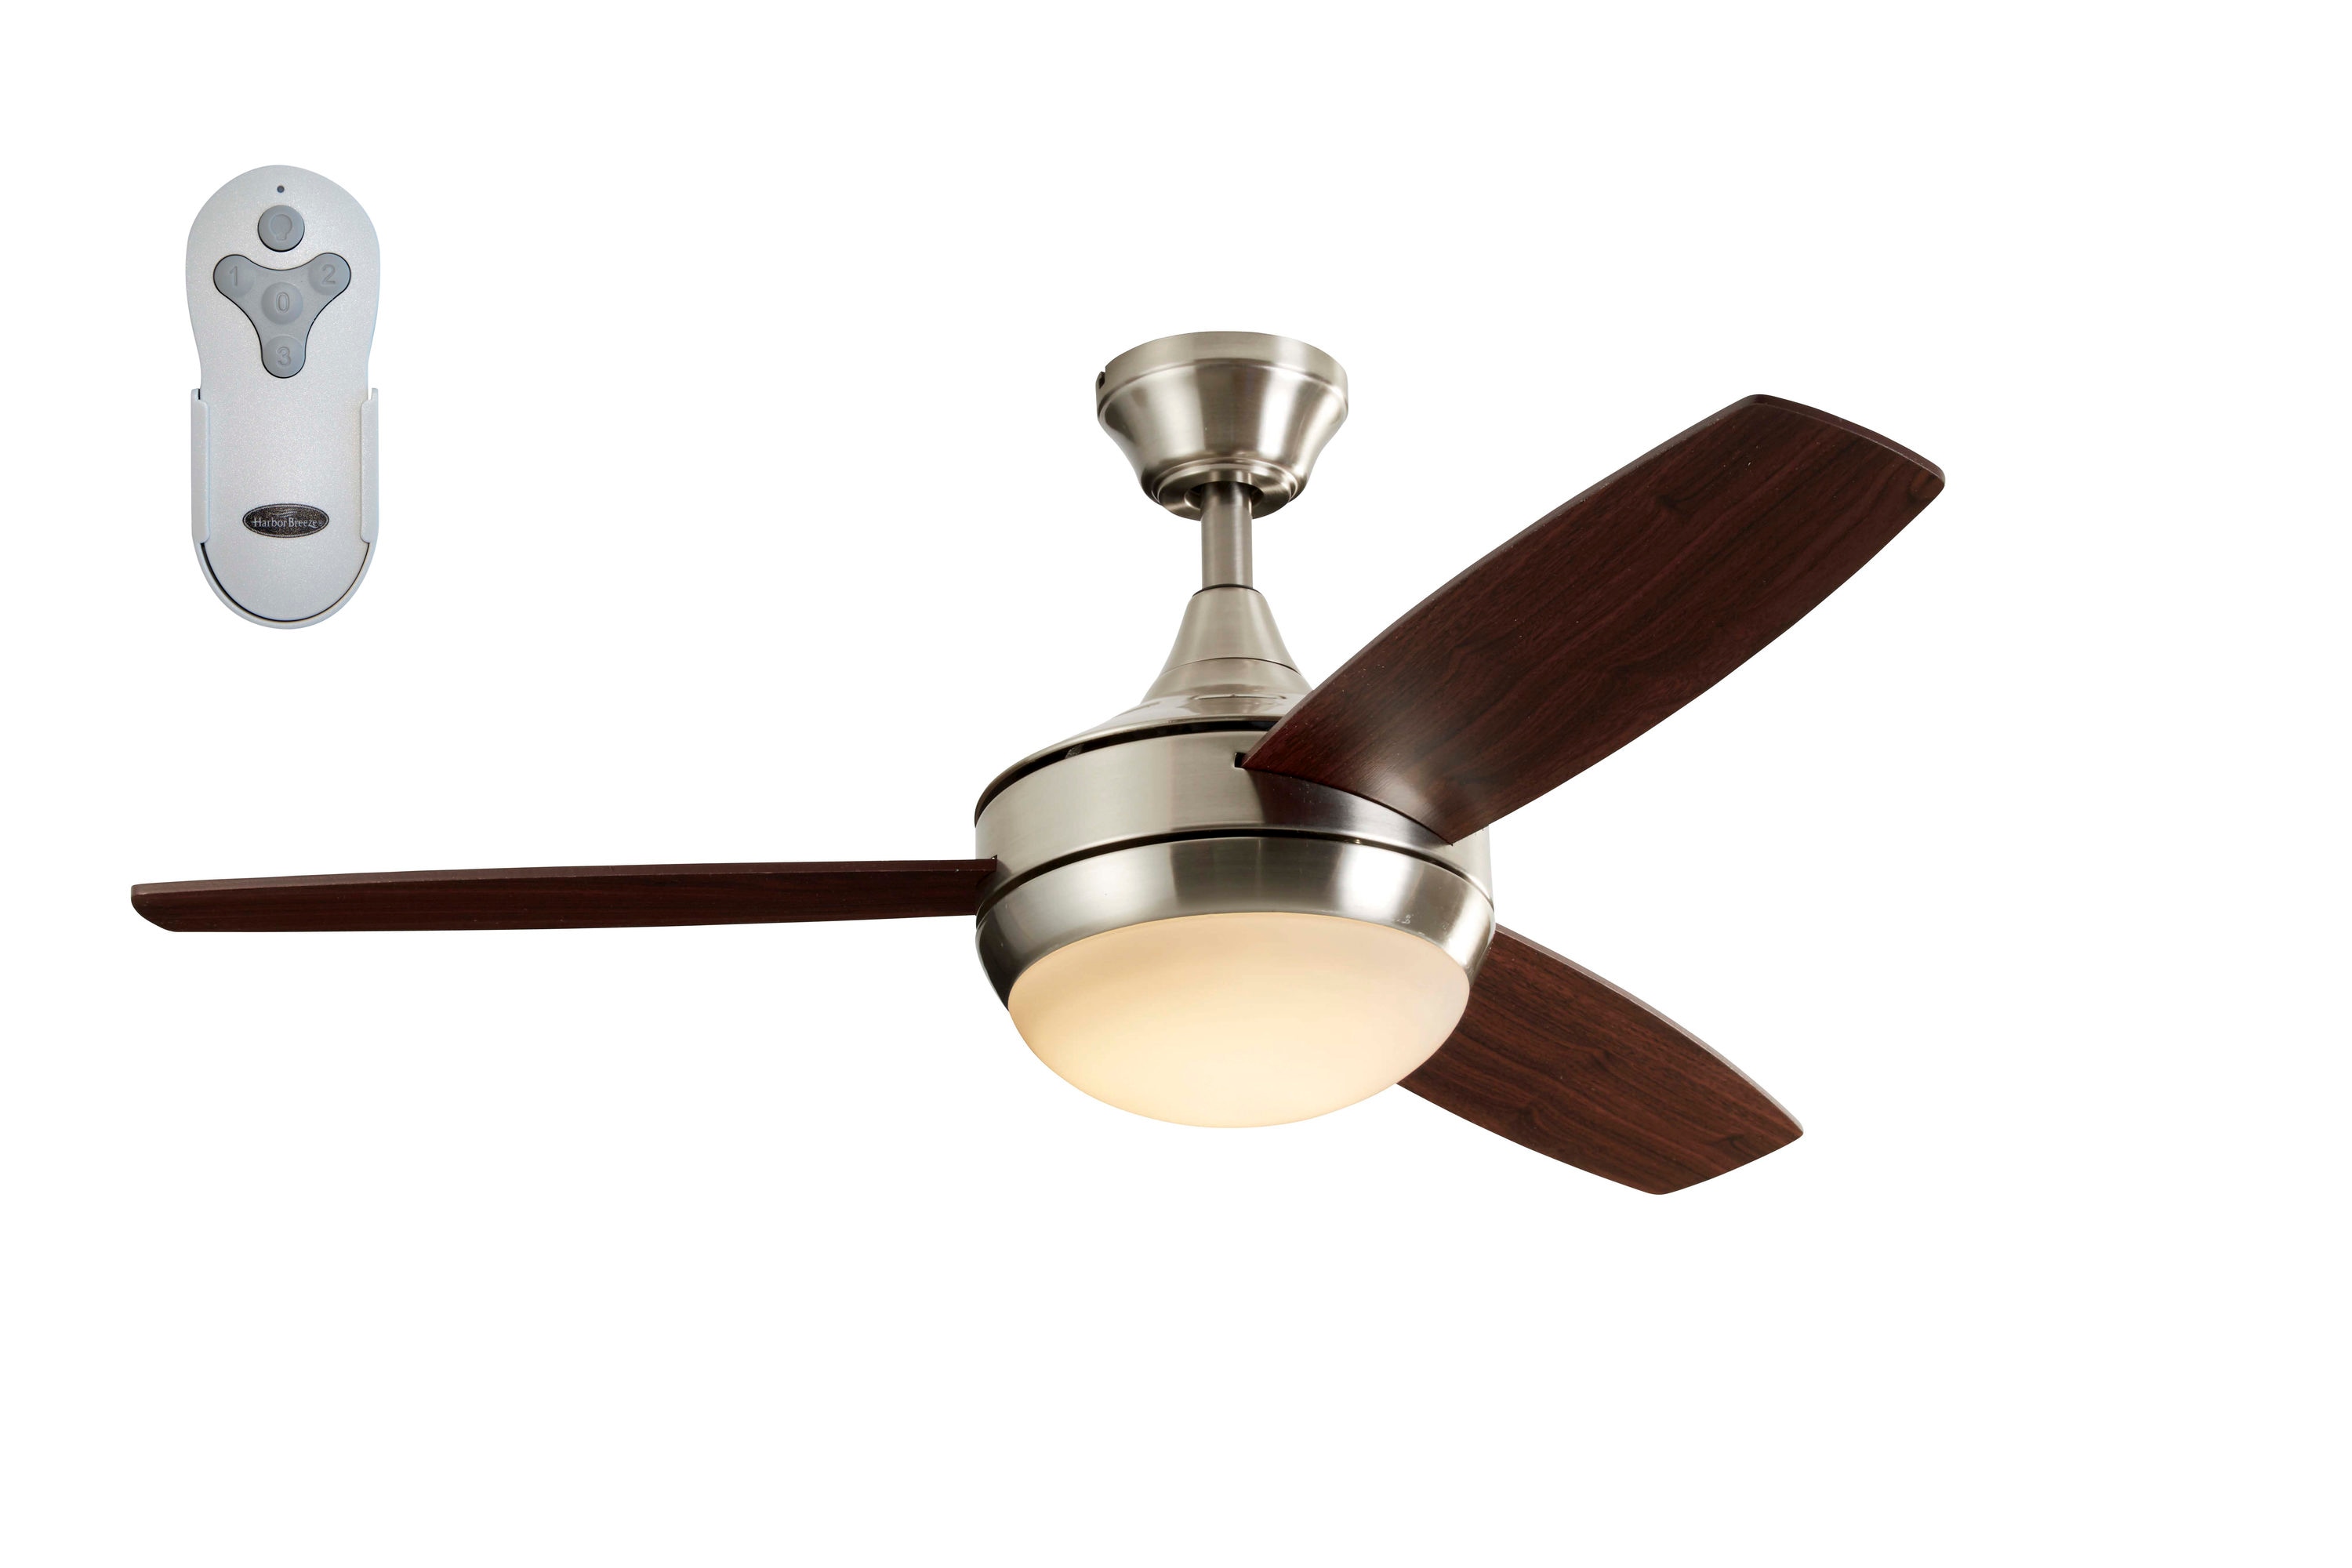 Harbor Breeze Beach Creek 44-in Brushed Nickel LED Ceiling Fan with Light Remote Control and 